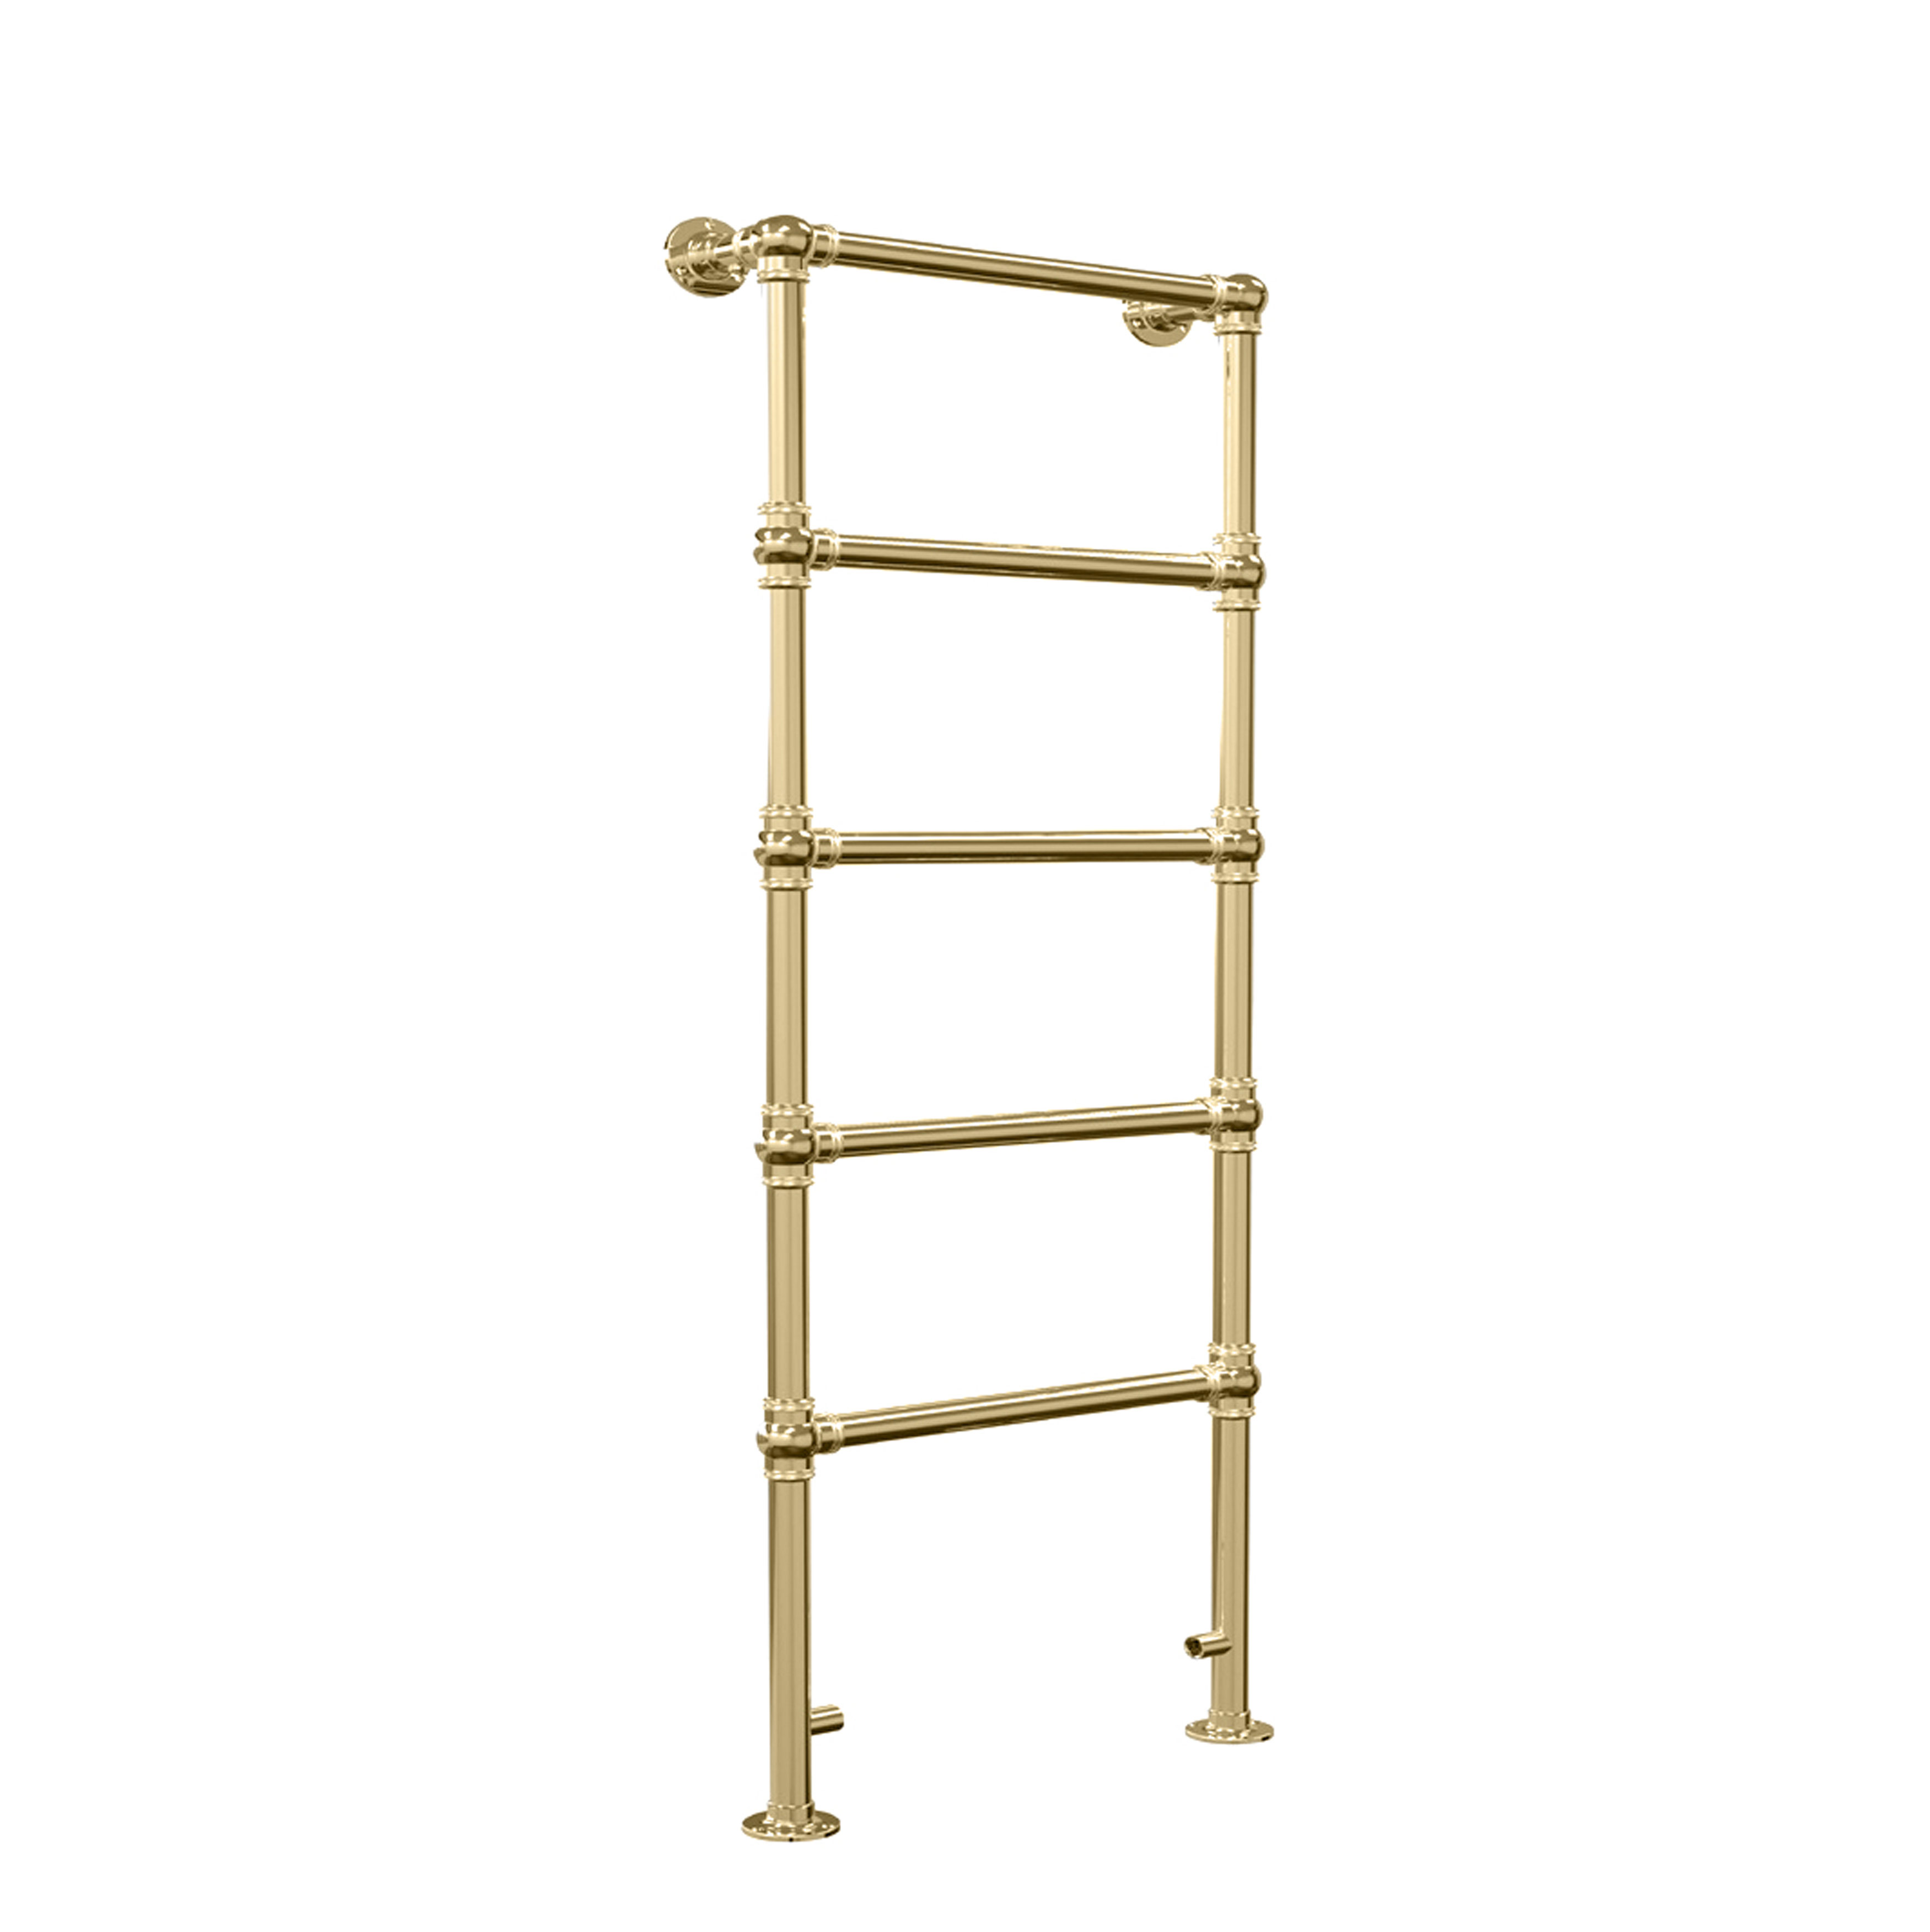 British made, Classical Single Towel Bar - Brass Rail from Thomas Crapper